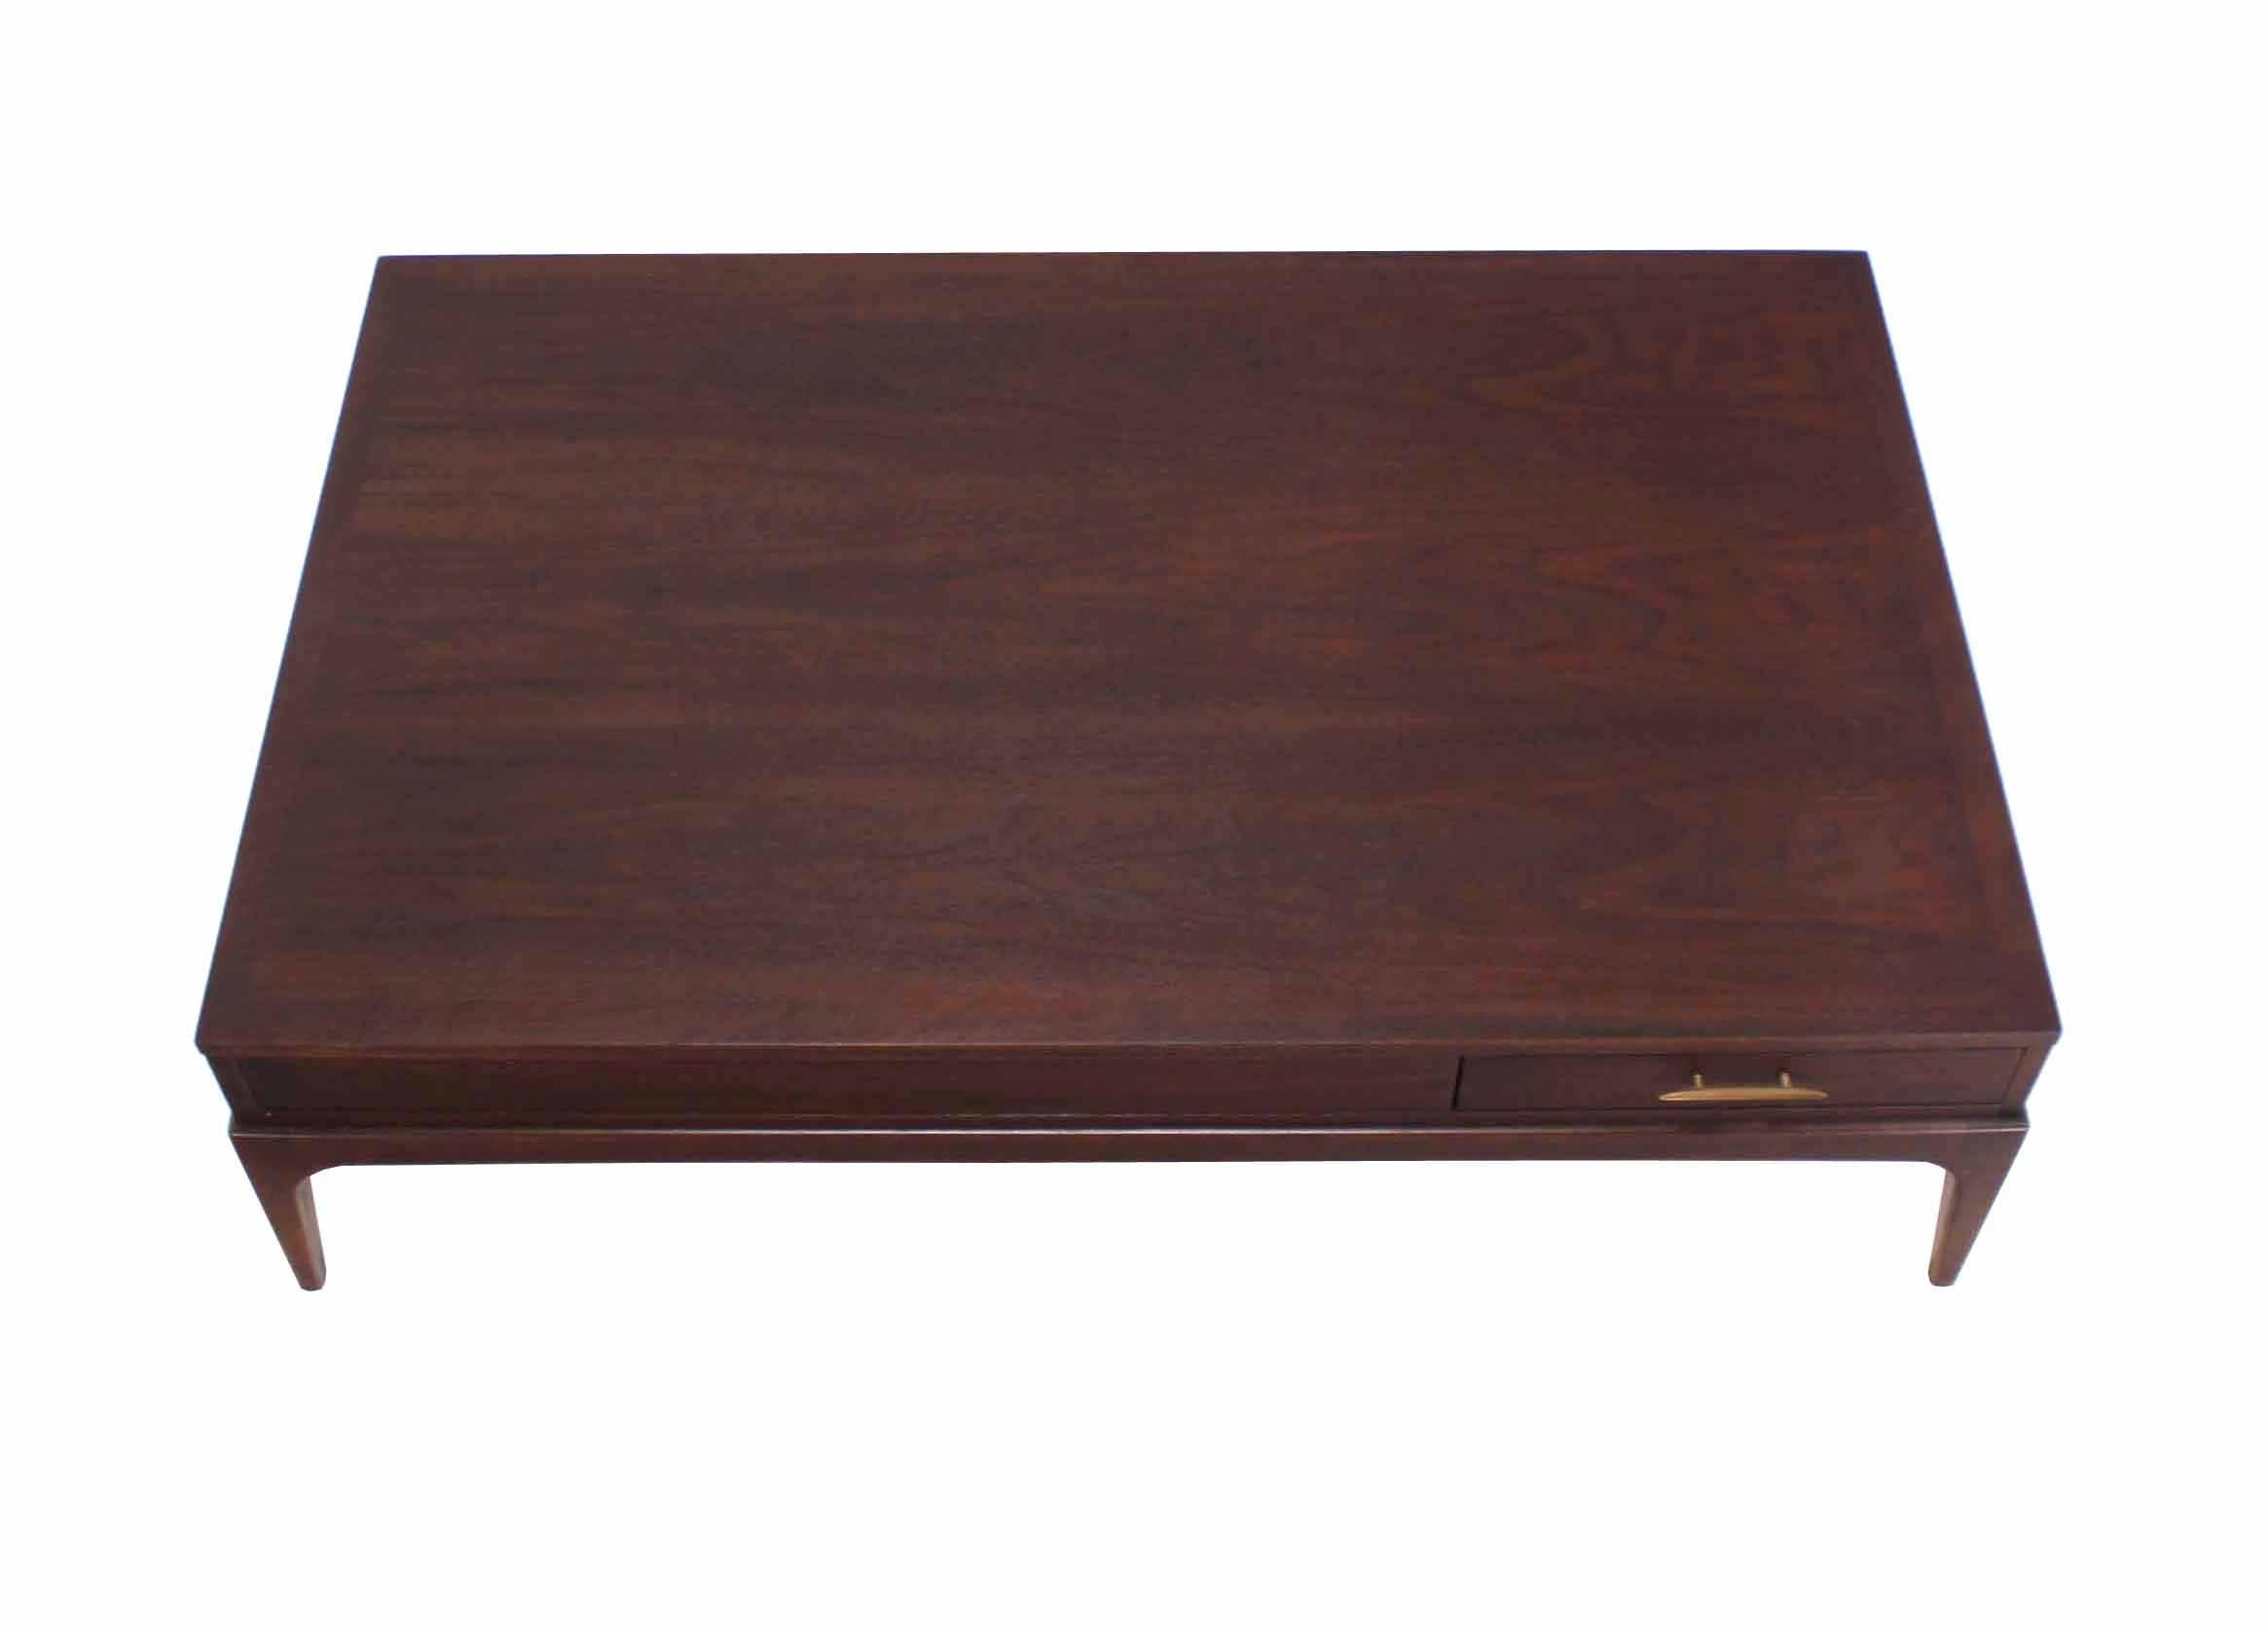 Large Rectangle One-Drawer Storage Bin Mid Century Walnut Coffee Table MINT In Excellent Condition For Sale In Rockaway, NJ